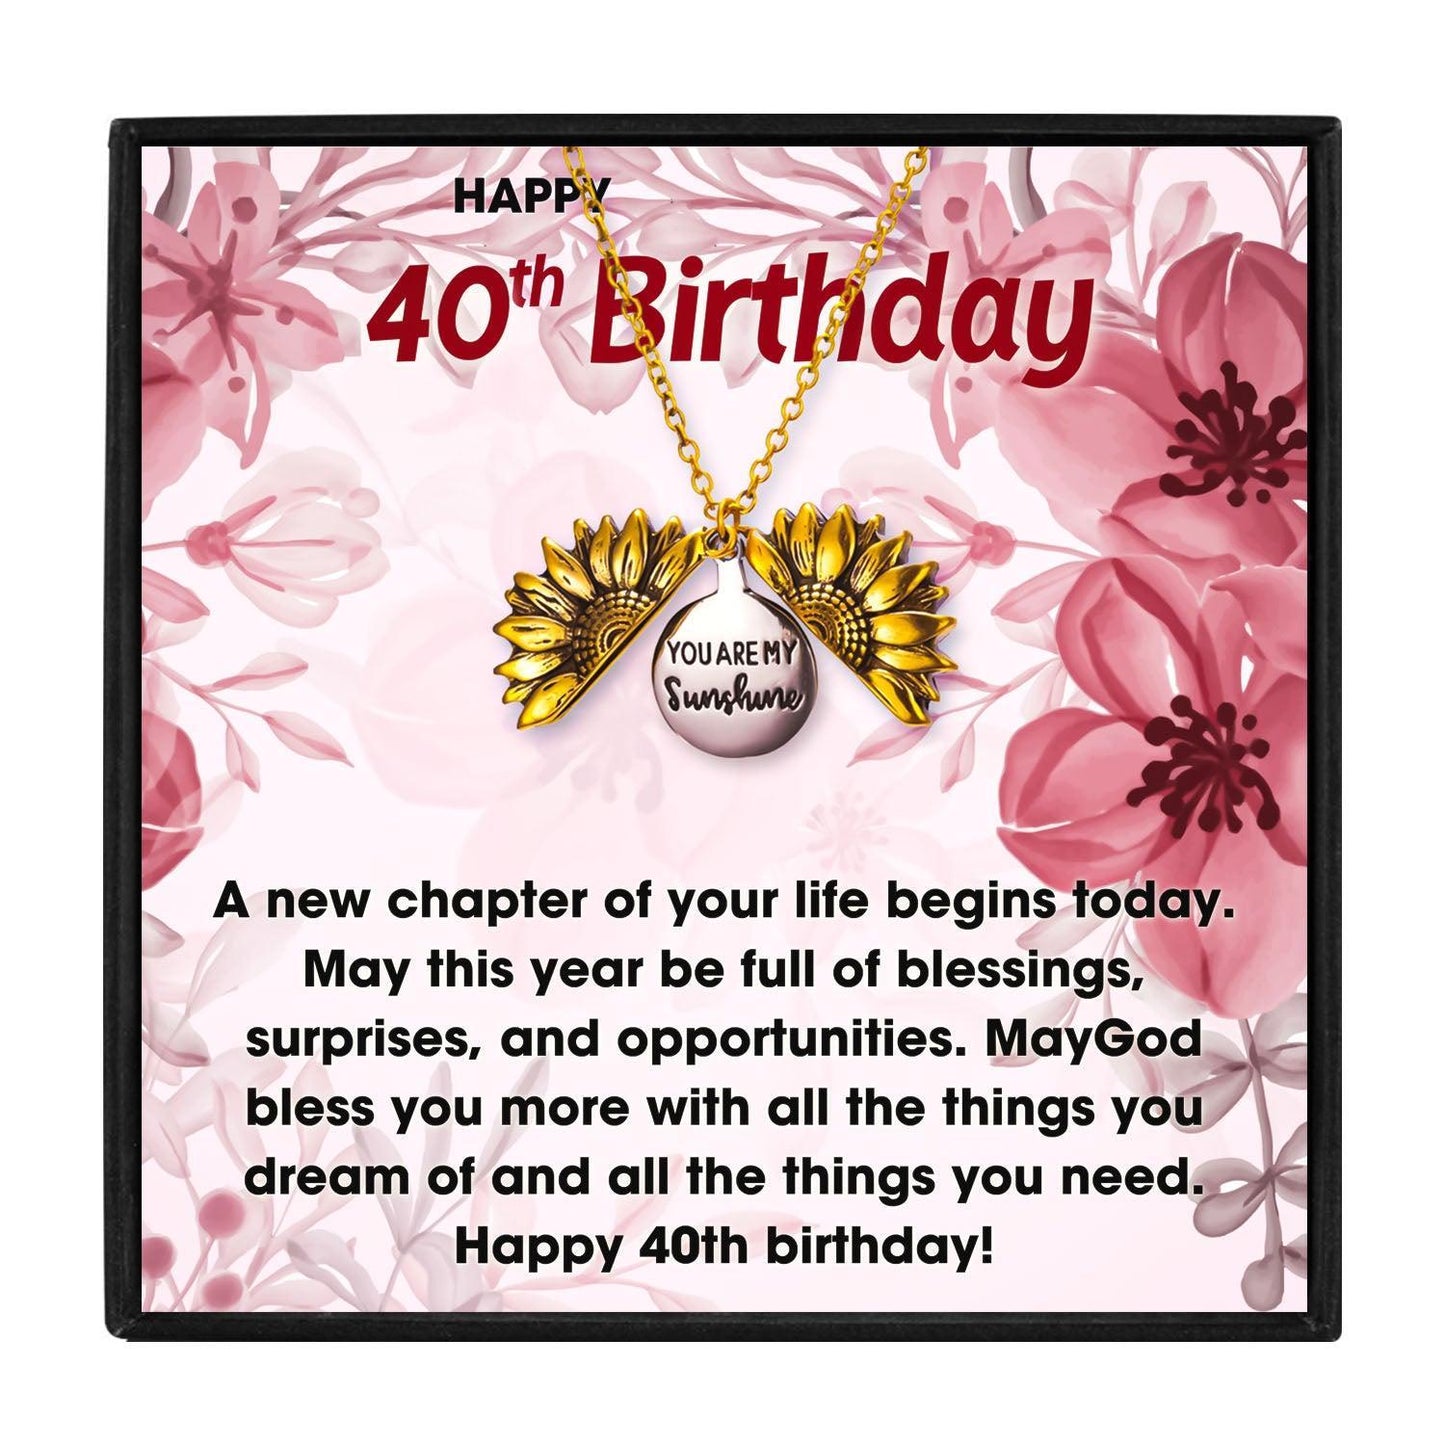 Unforgettable 40th Birthday Gift Ideas for Her in 2023 | Unforgettable 40th Birthday Gift Ideas for Her - undefined | 40th birthday gift ideas for her, 40th birthday ideas for her, 40th birthday presents for her, creative 40th birthday gift ideas | From Hunny Life | hunnylife.com